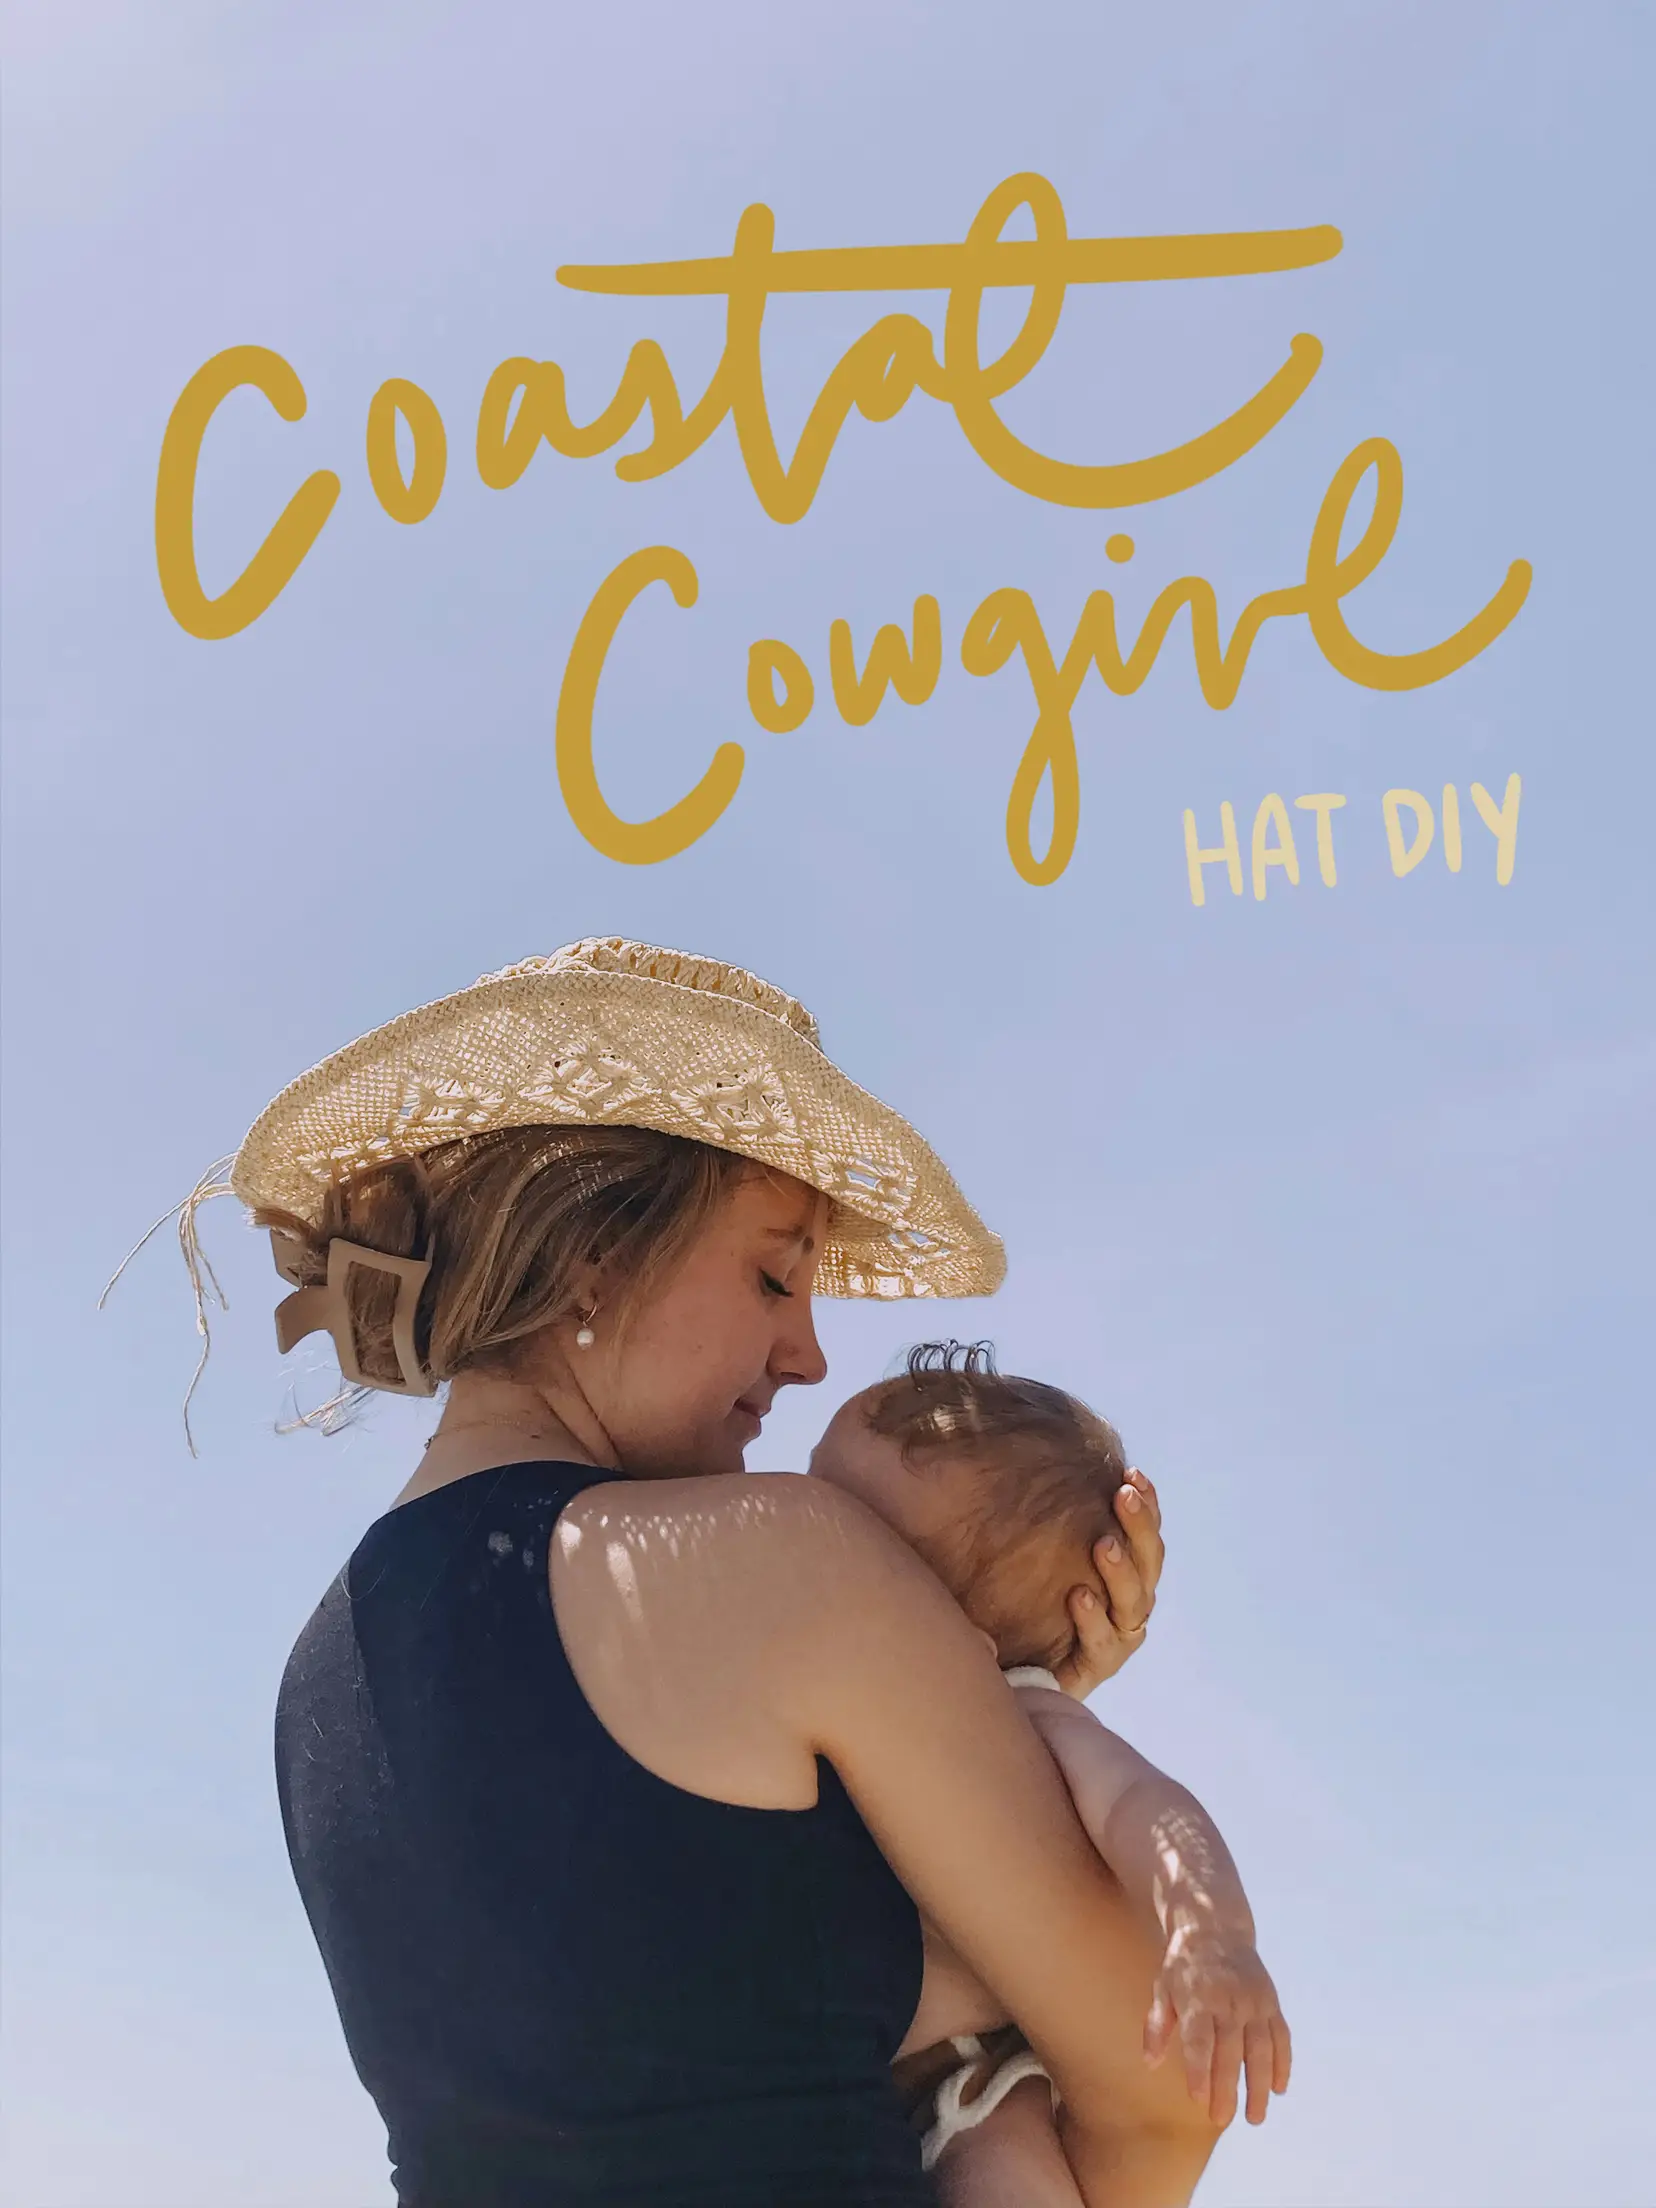 🤠 🌊 Coastal Cowgirl Hat✨🦋's images